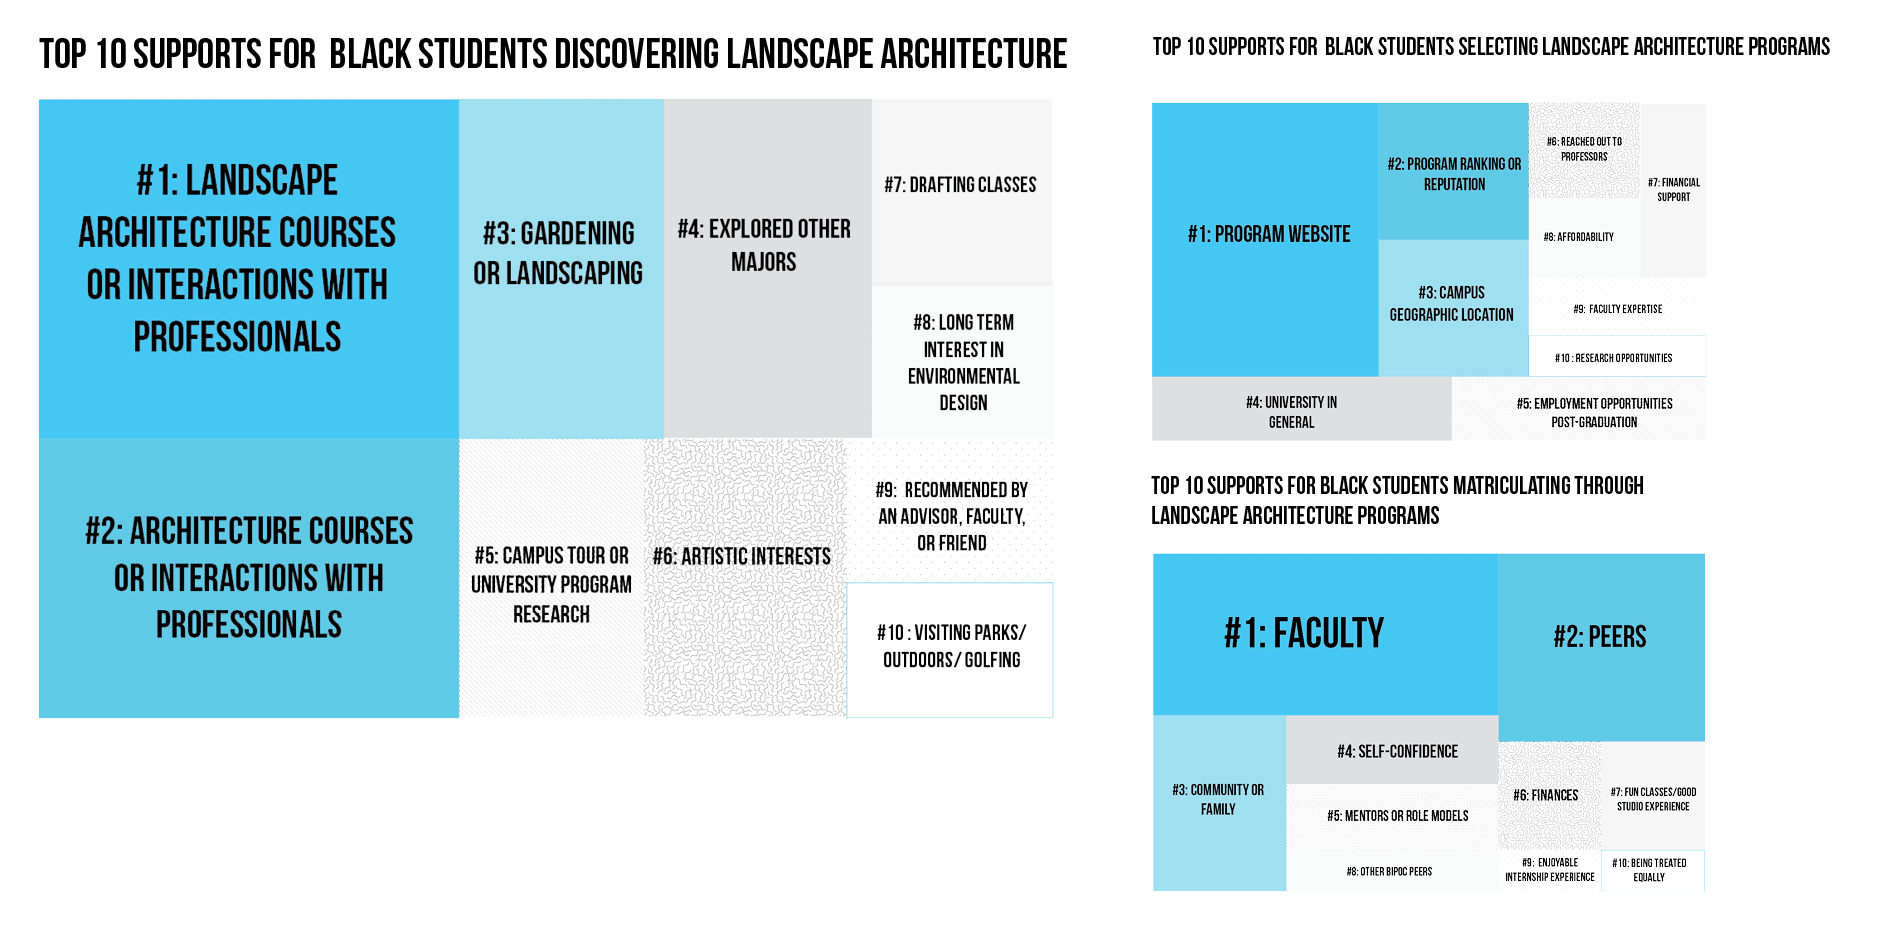 What resources do Black LA students use while discovering, choosing, and navigating landscape architecture?